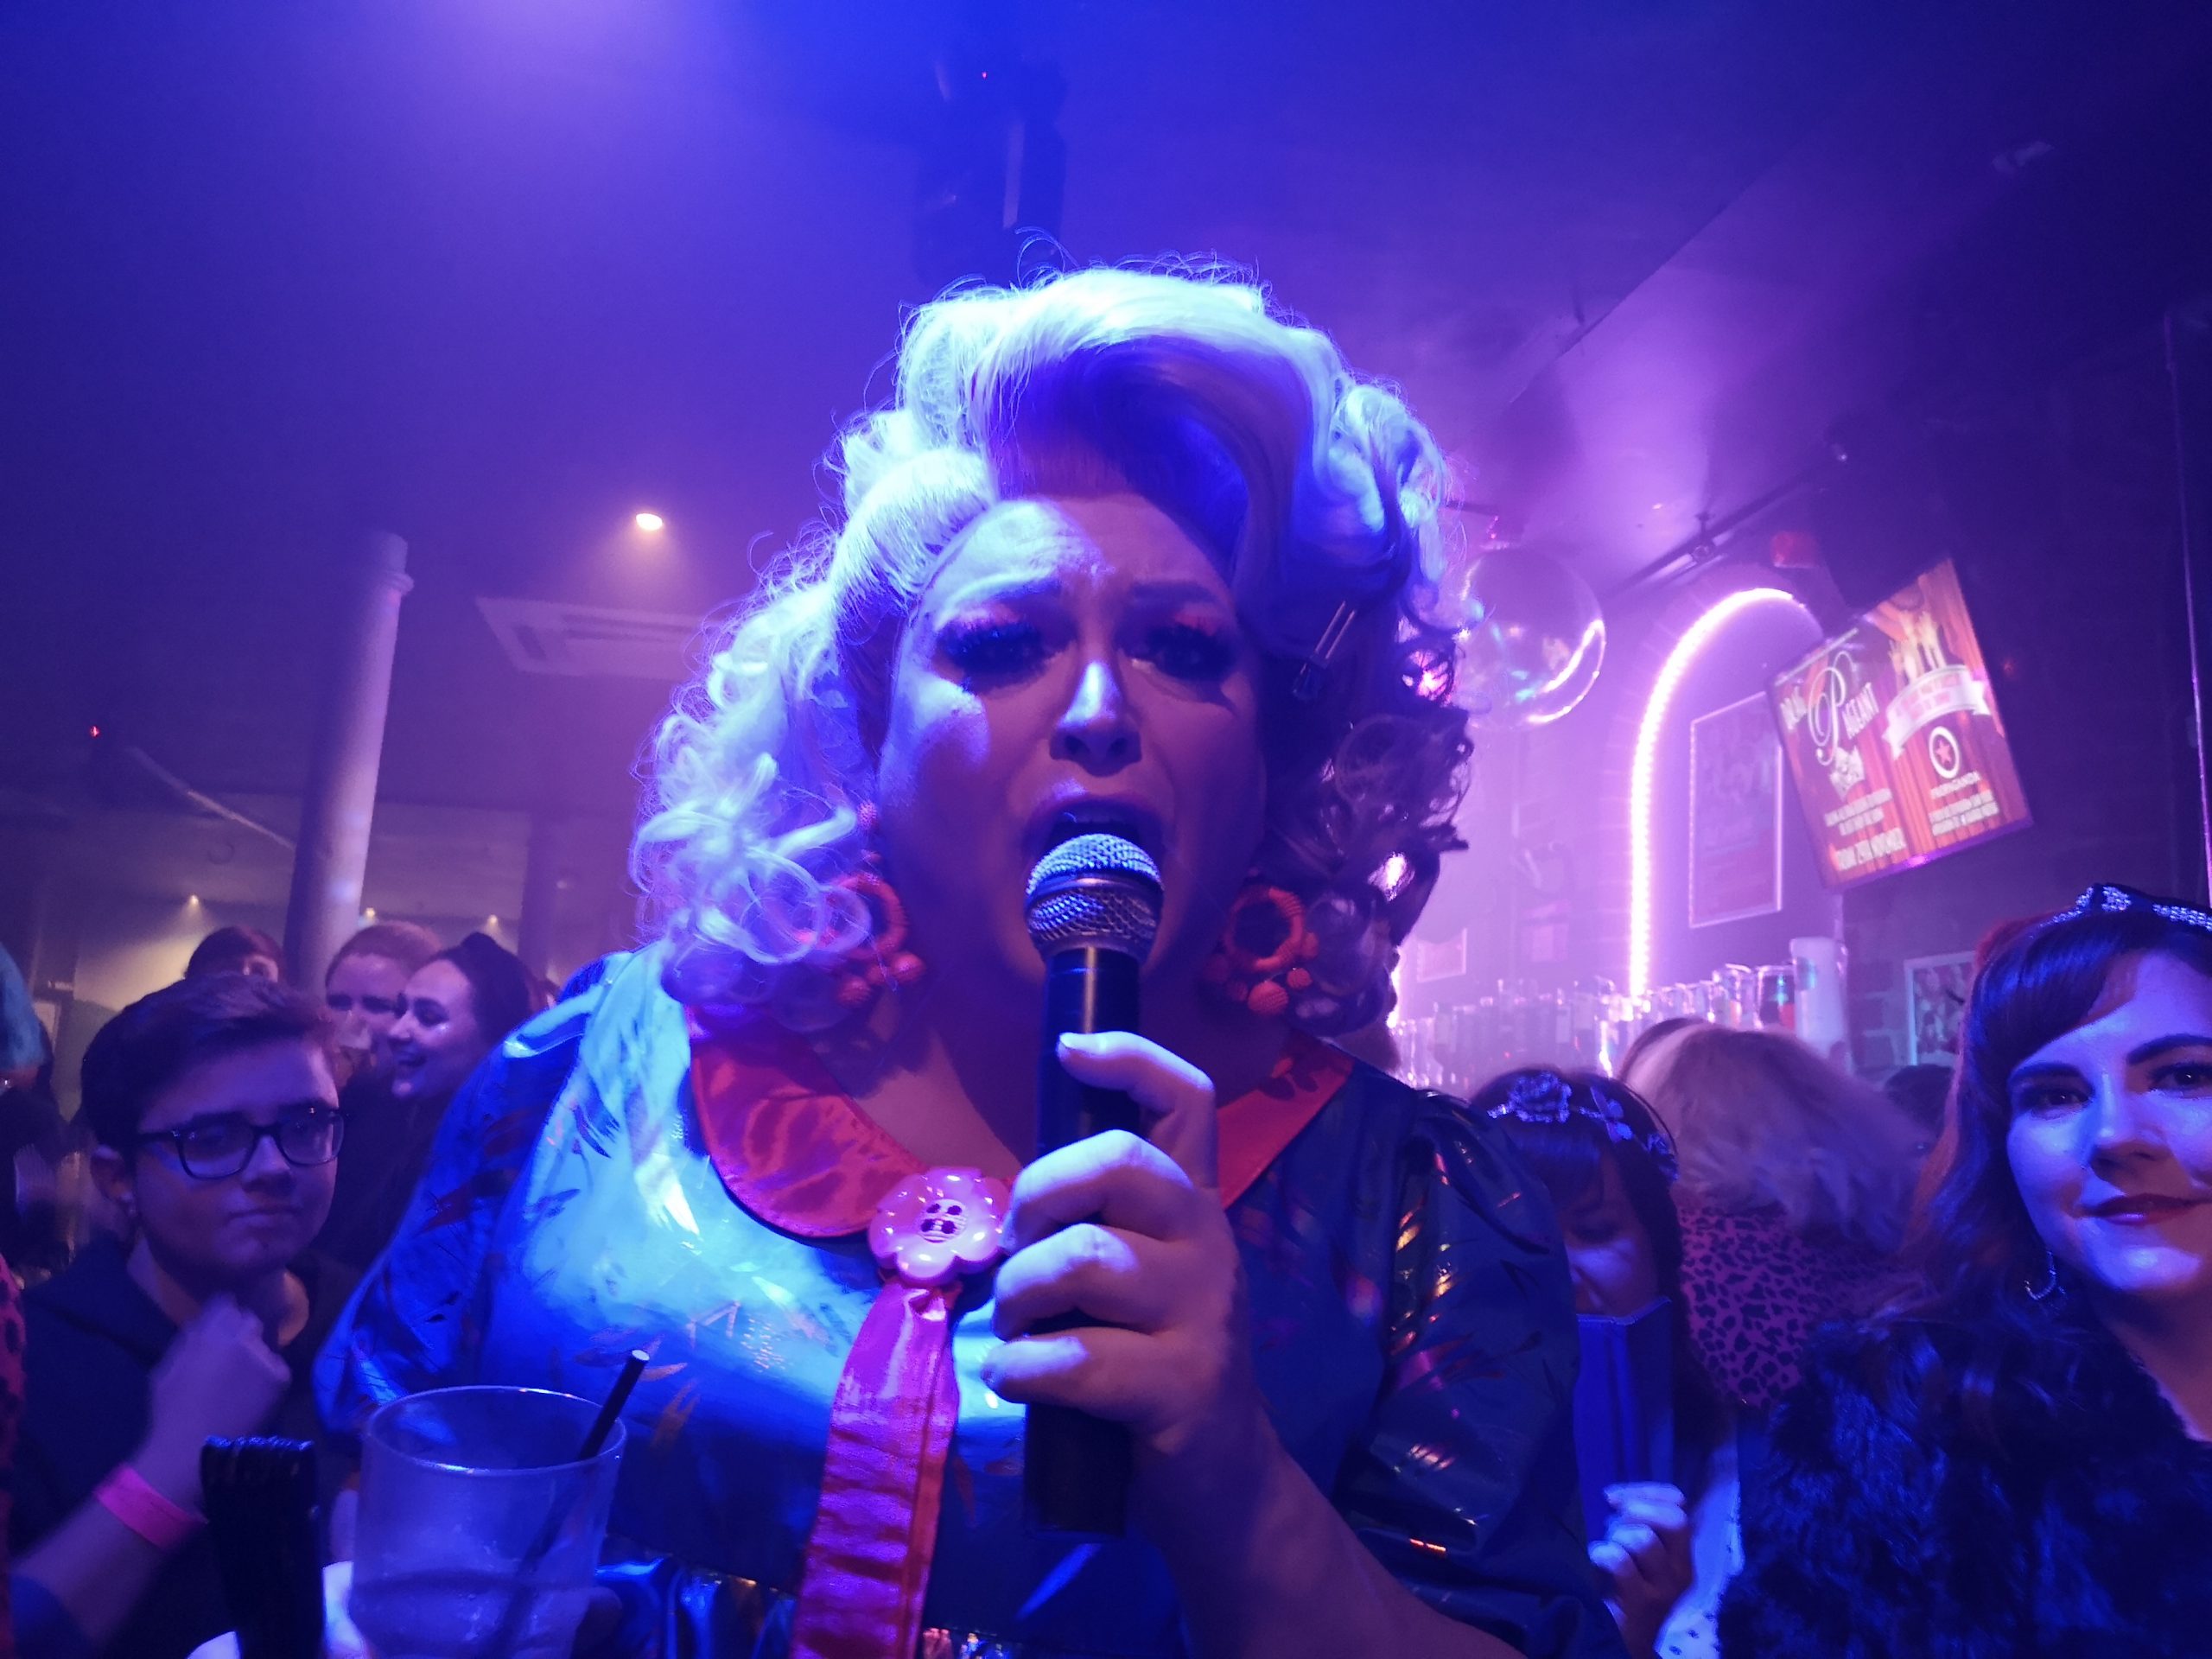 As well as new wave non-traditional drag, the evening featured a range of Lily Savagesque drag queens. Whilst some queens lip-synced there performance, this queen sang live.